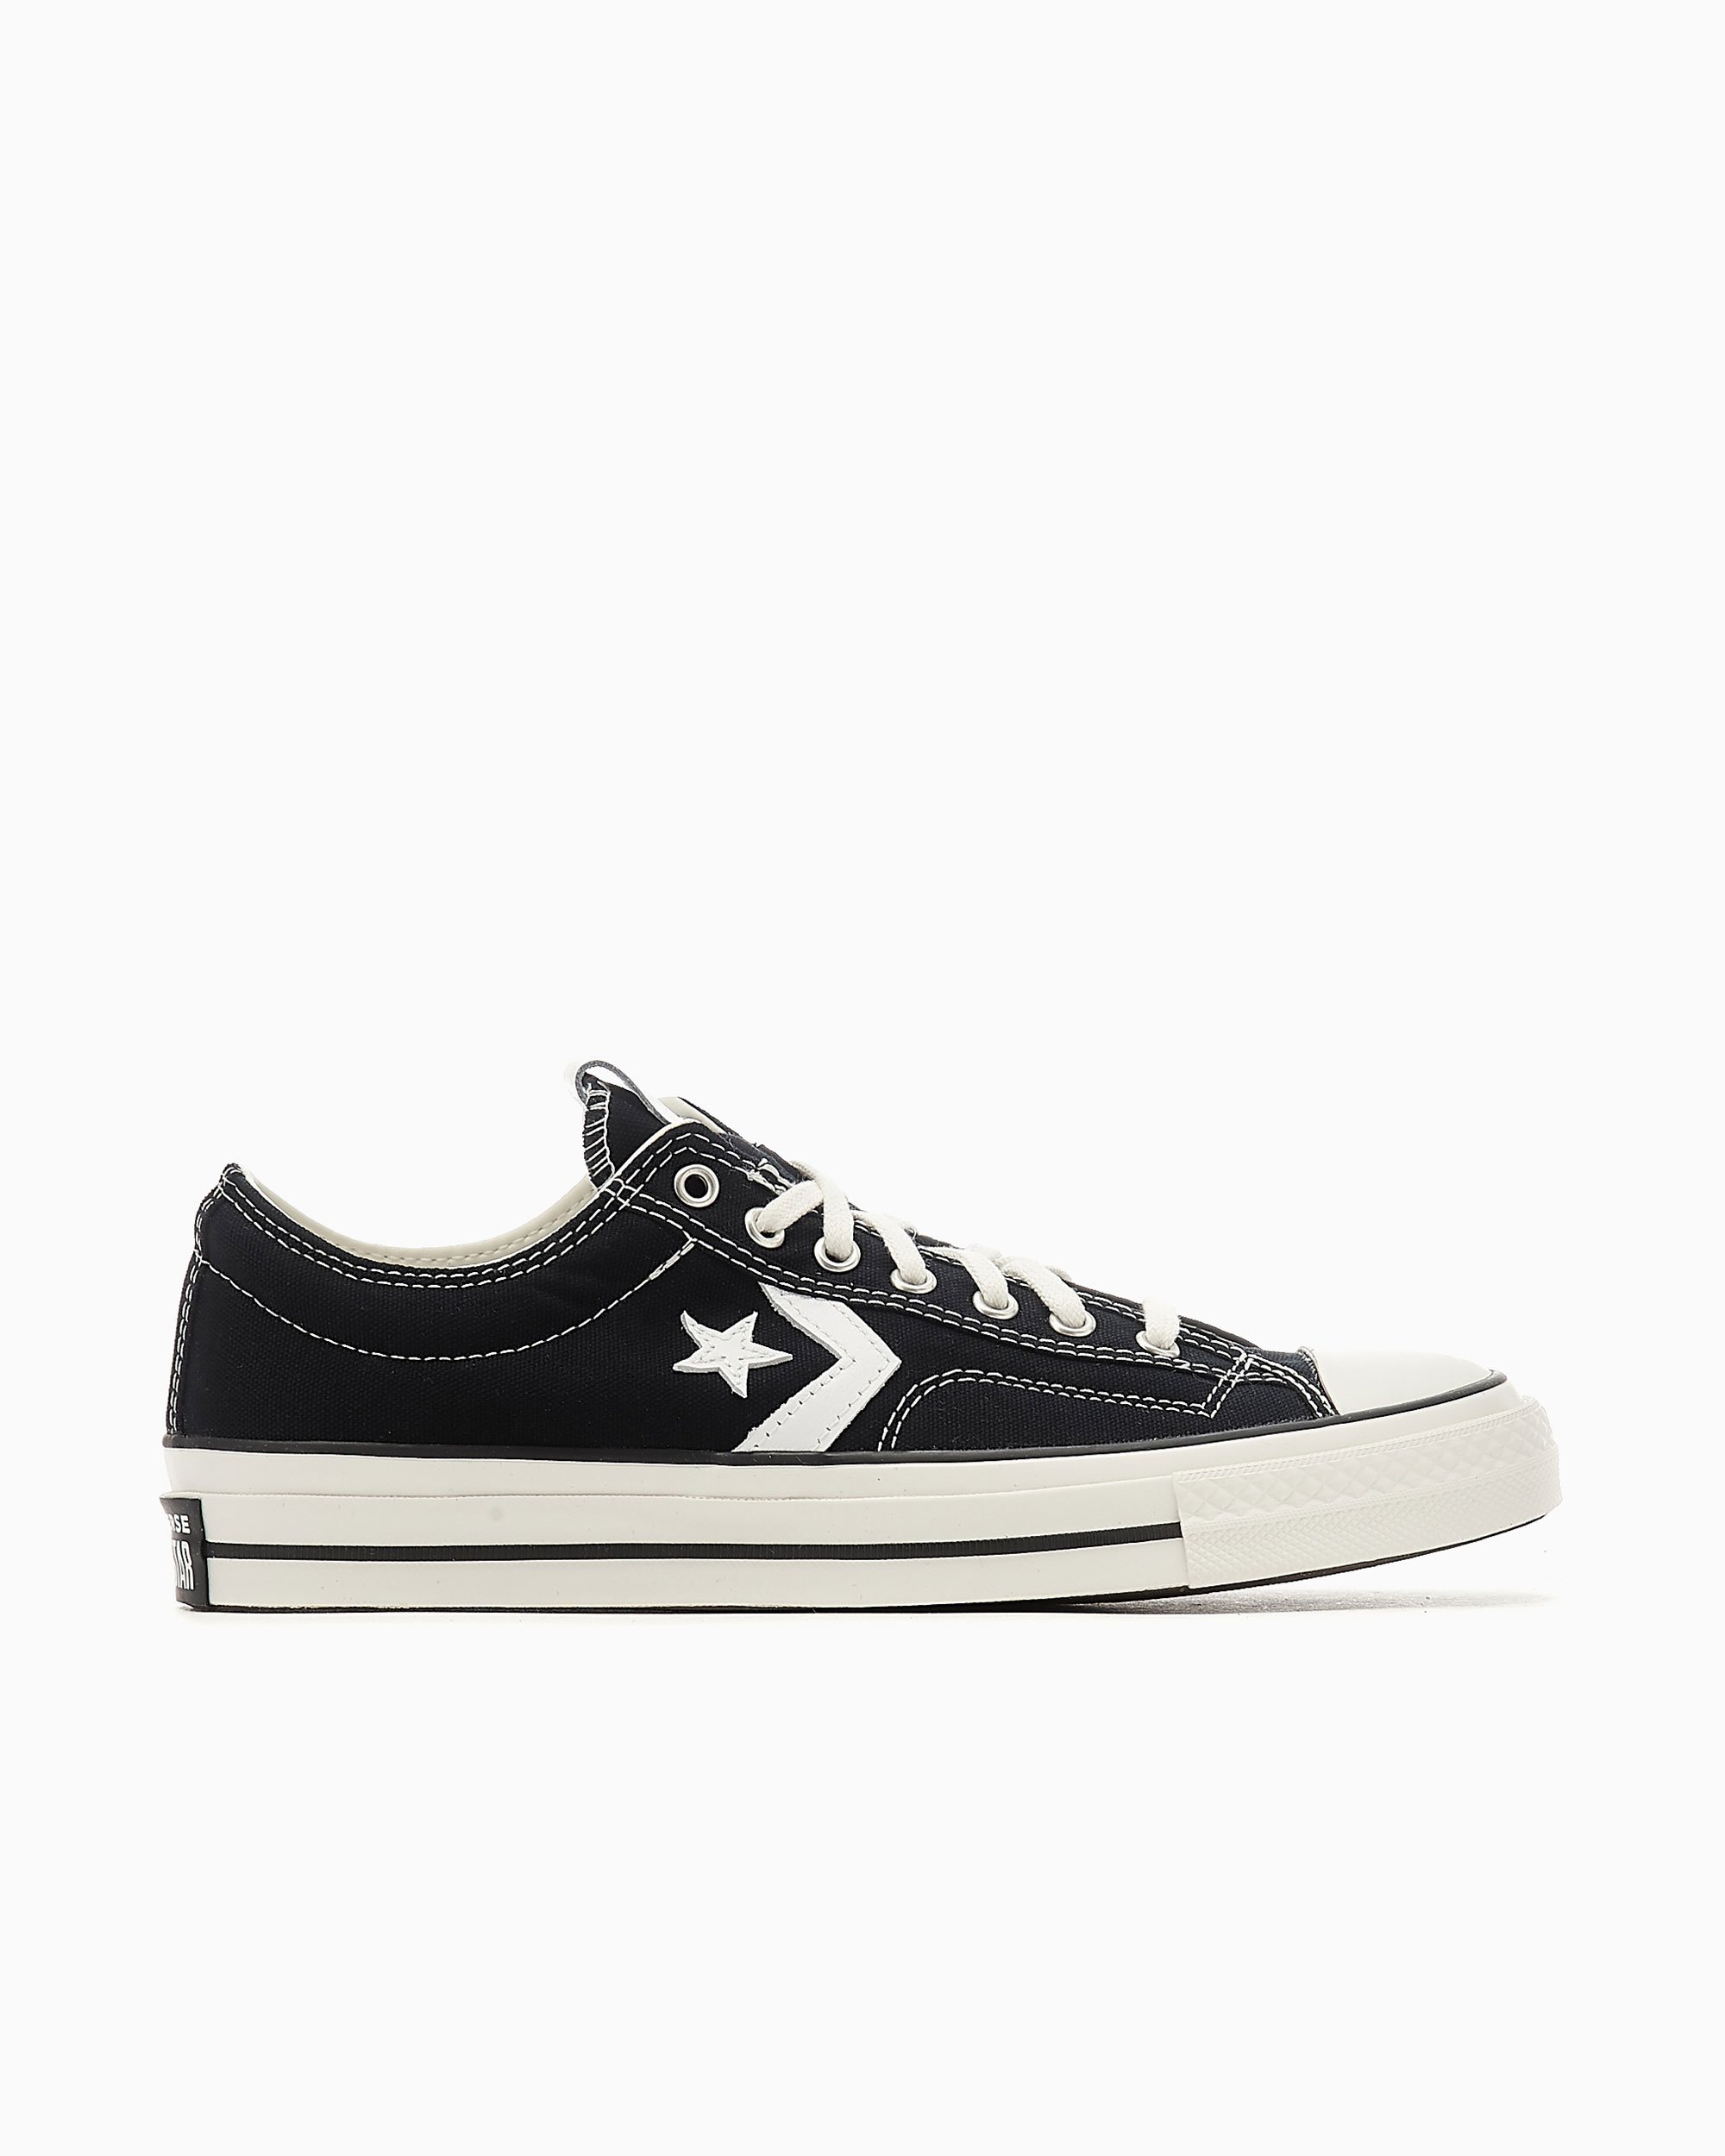 Converse Star Player 76 OX Black A01607C| Buy Online at